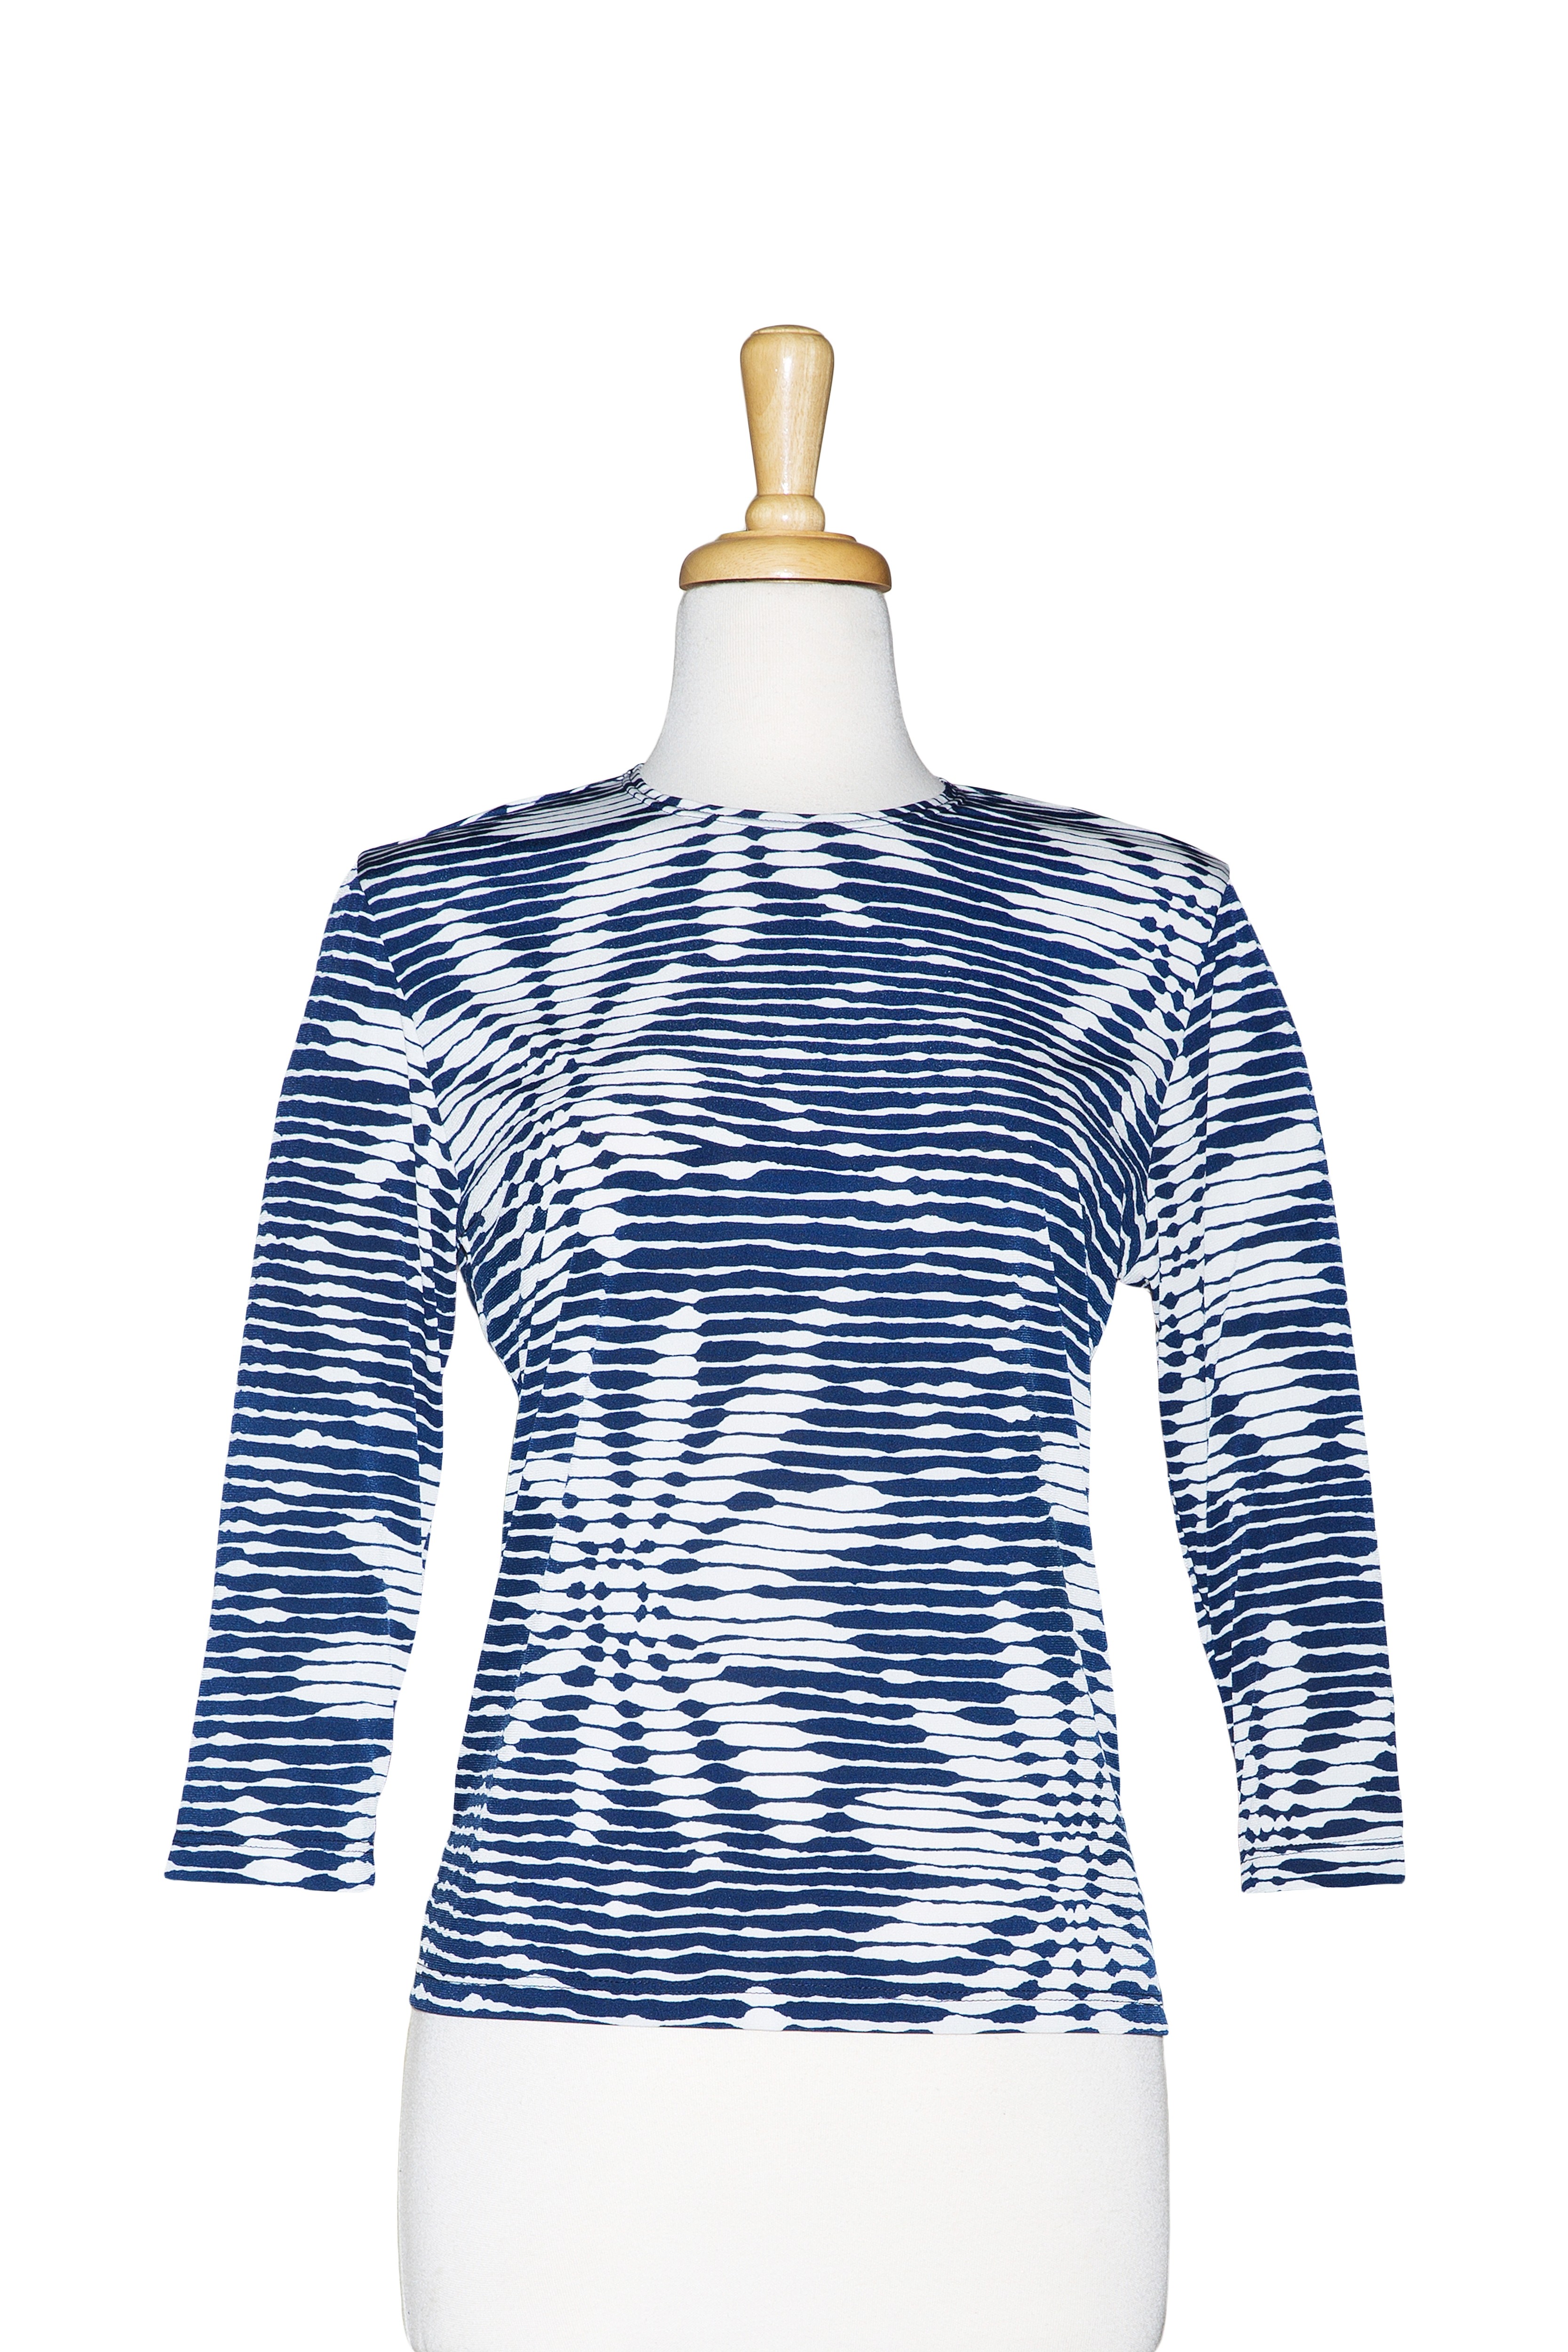 Plus Size Navy and White Stripes and Floral Microfiber 3/4 Sleeve Top 